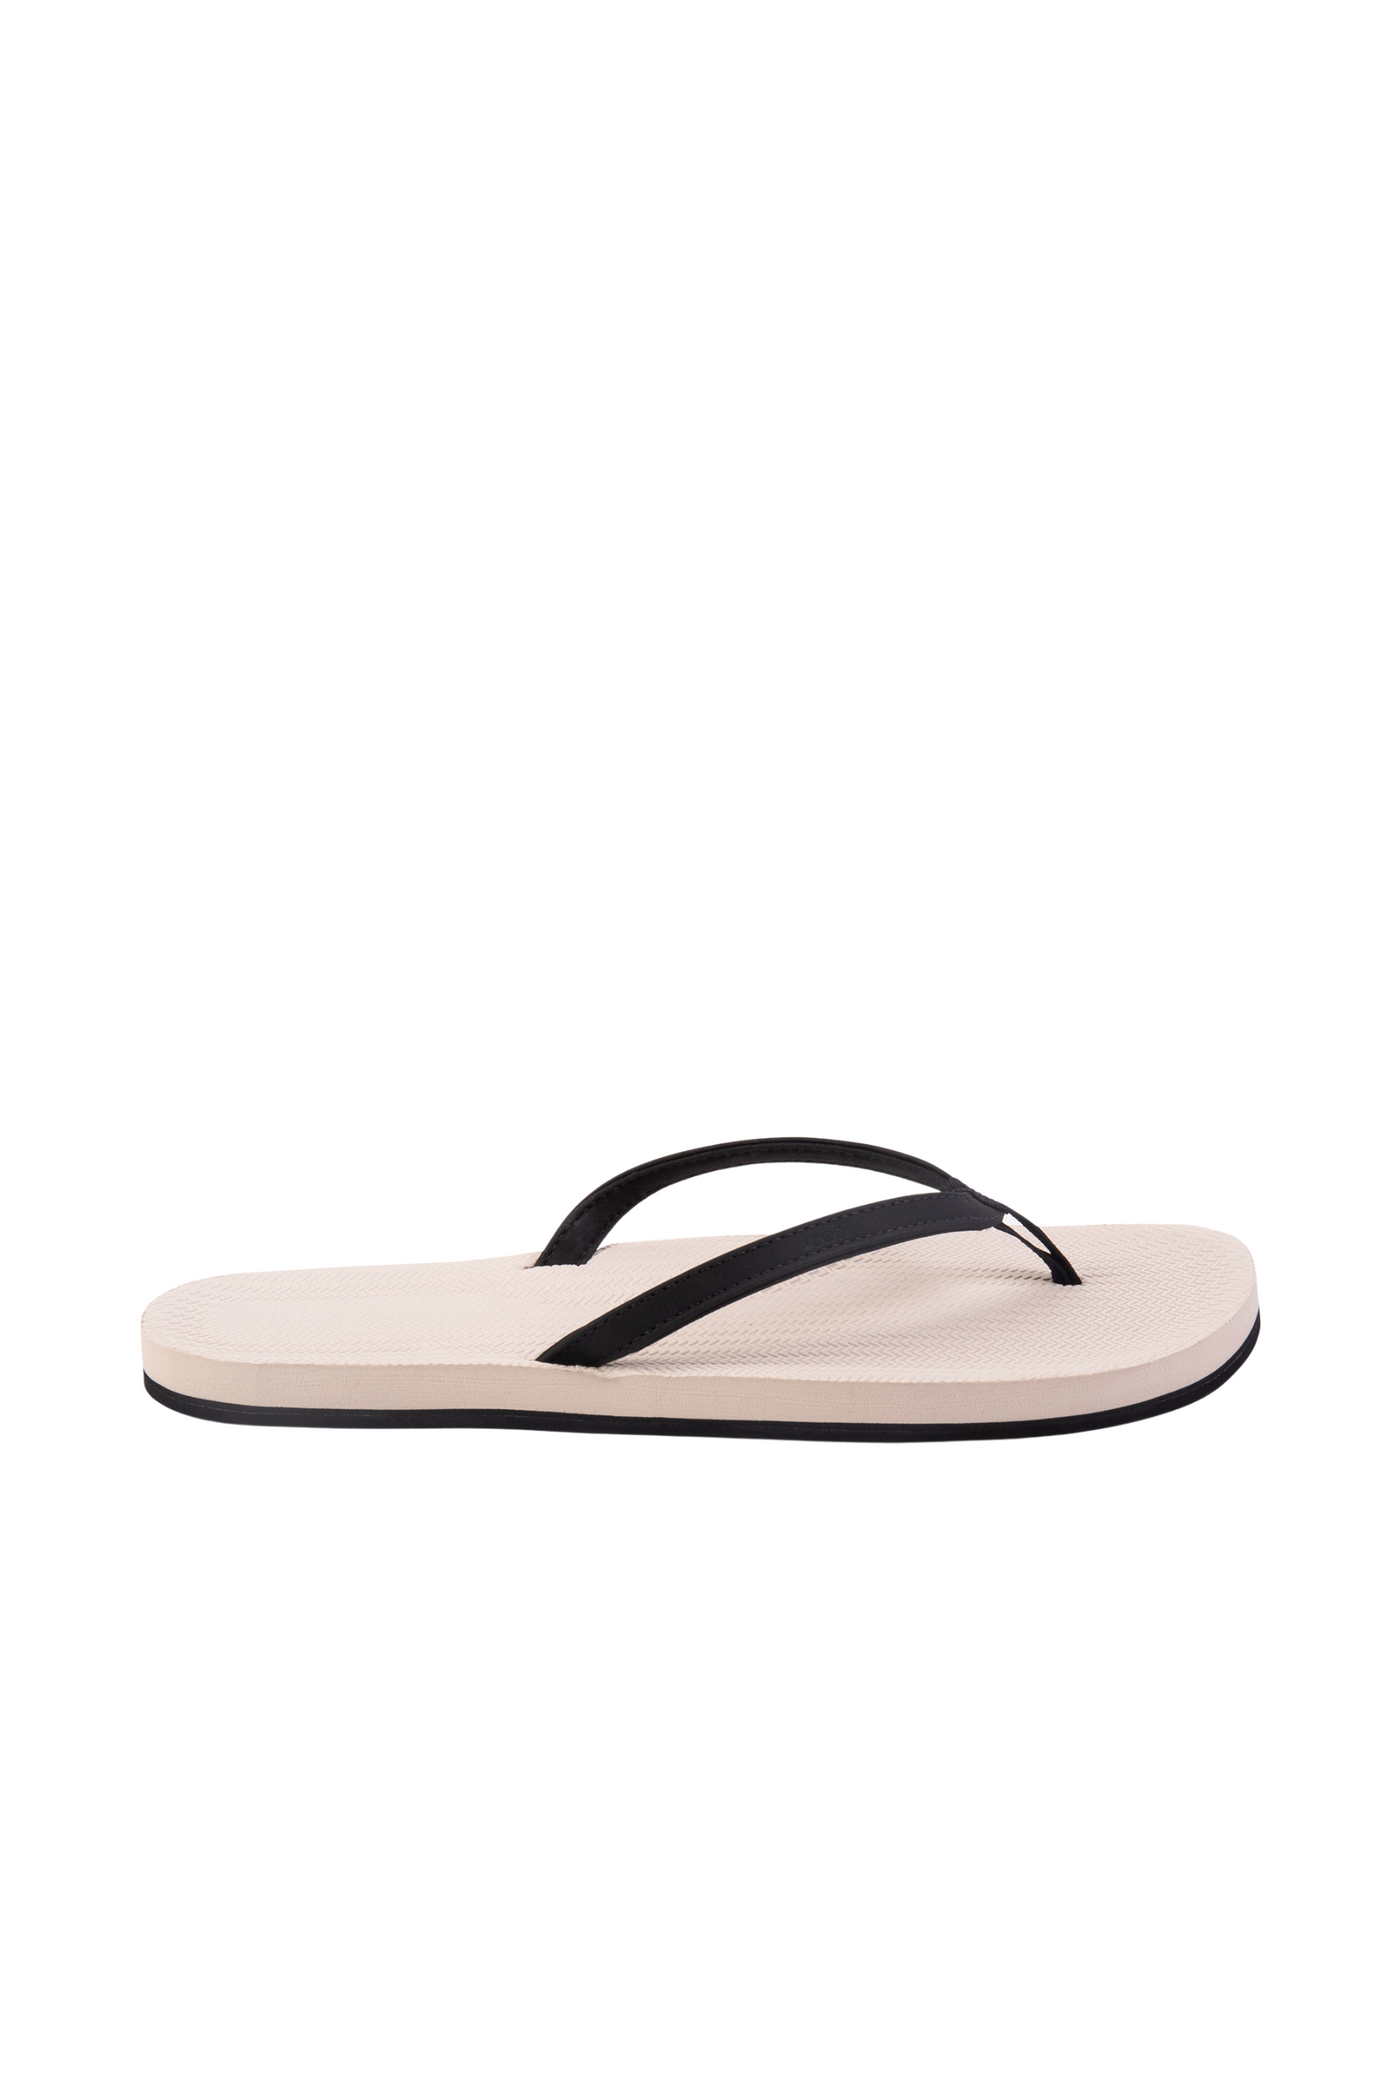 Indosole Women’s ESSNTLS Flip Flops in Sea Salt and Black, available on ZERRIN with free Singapore shipping